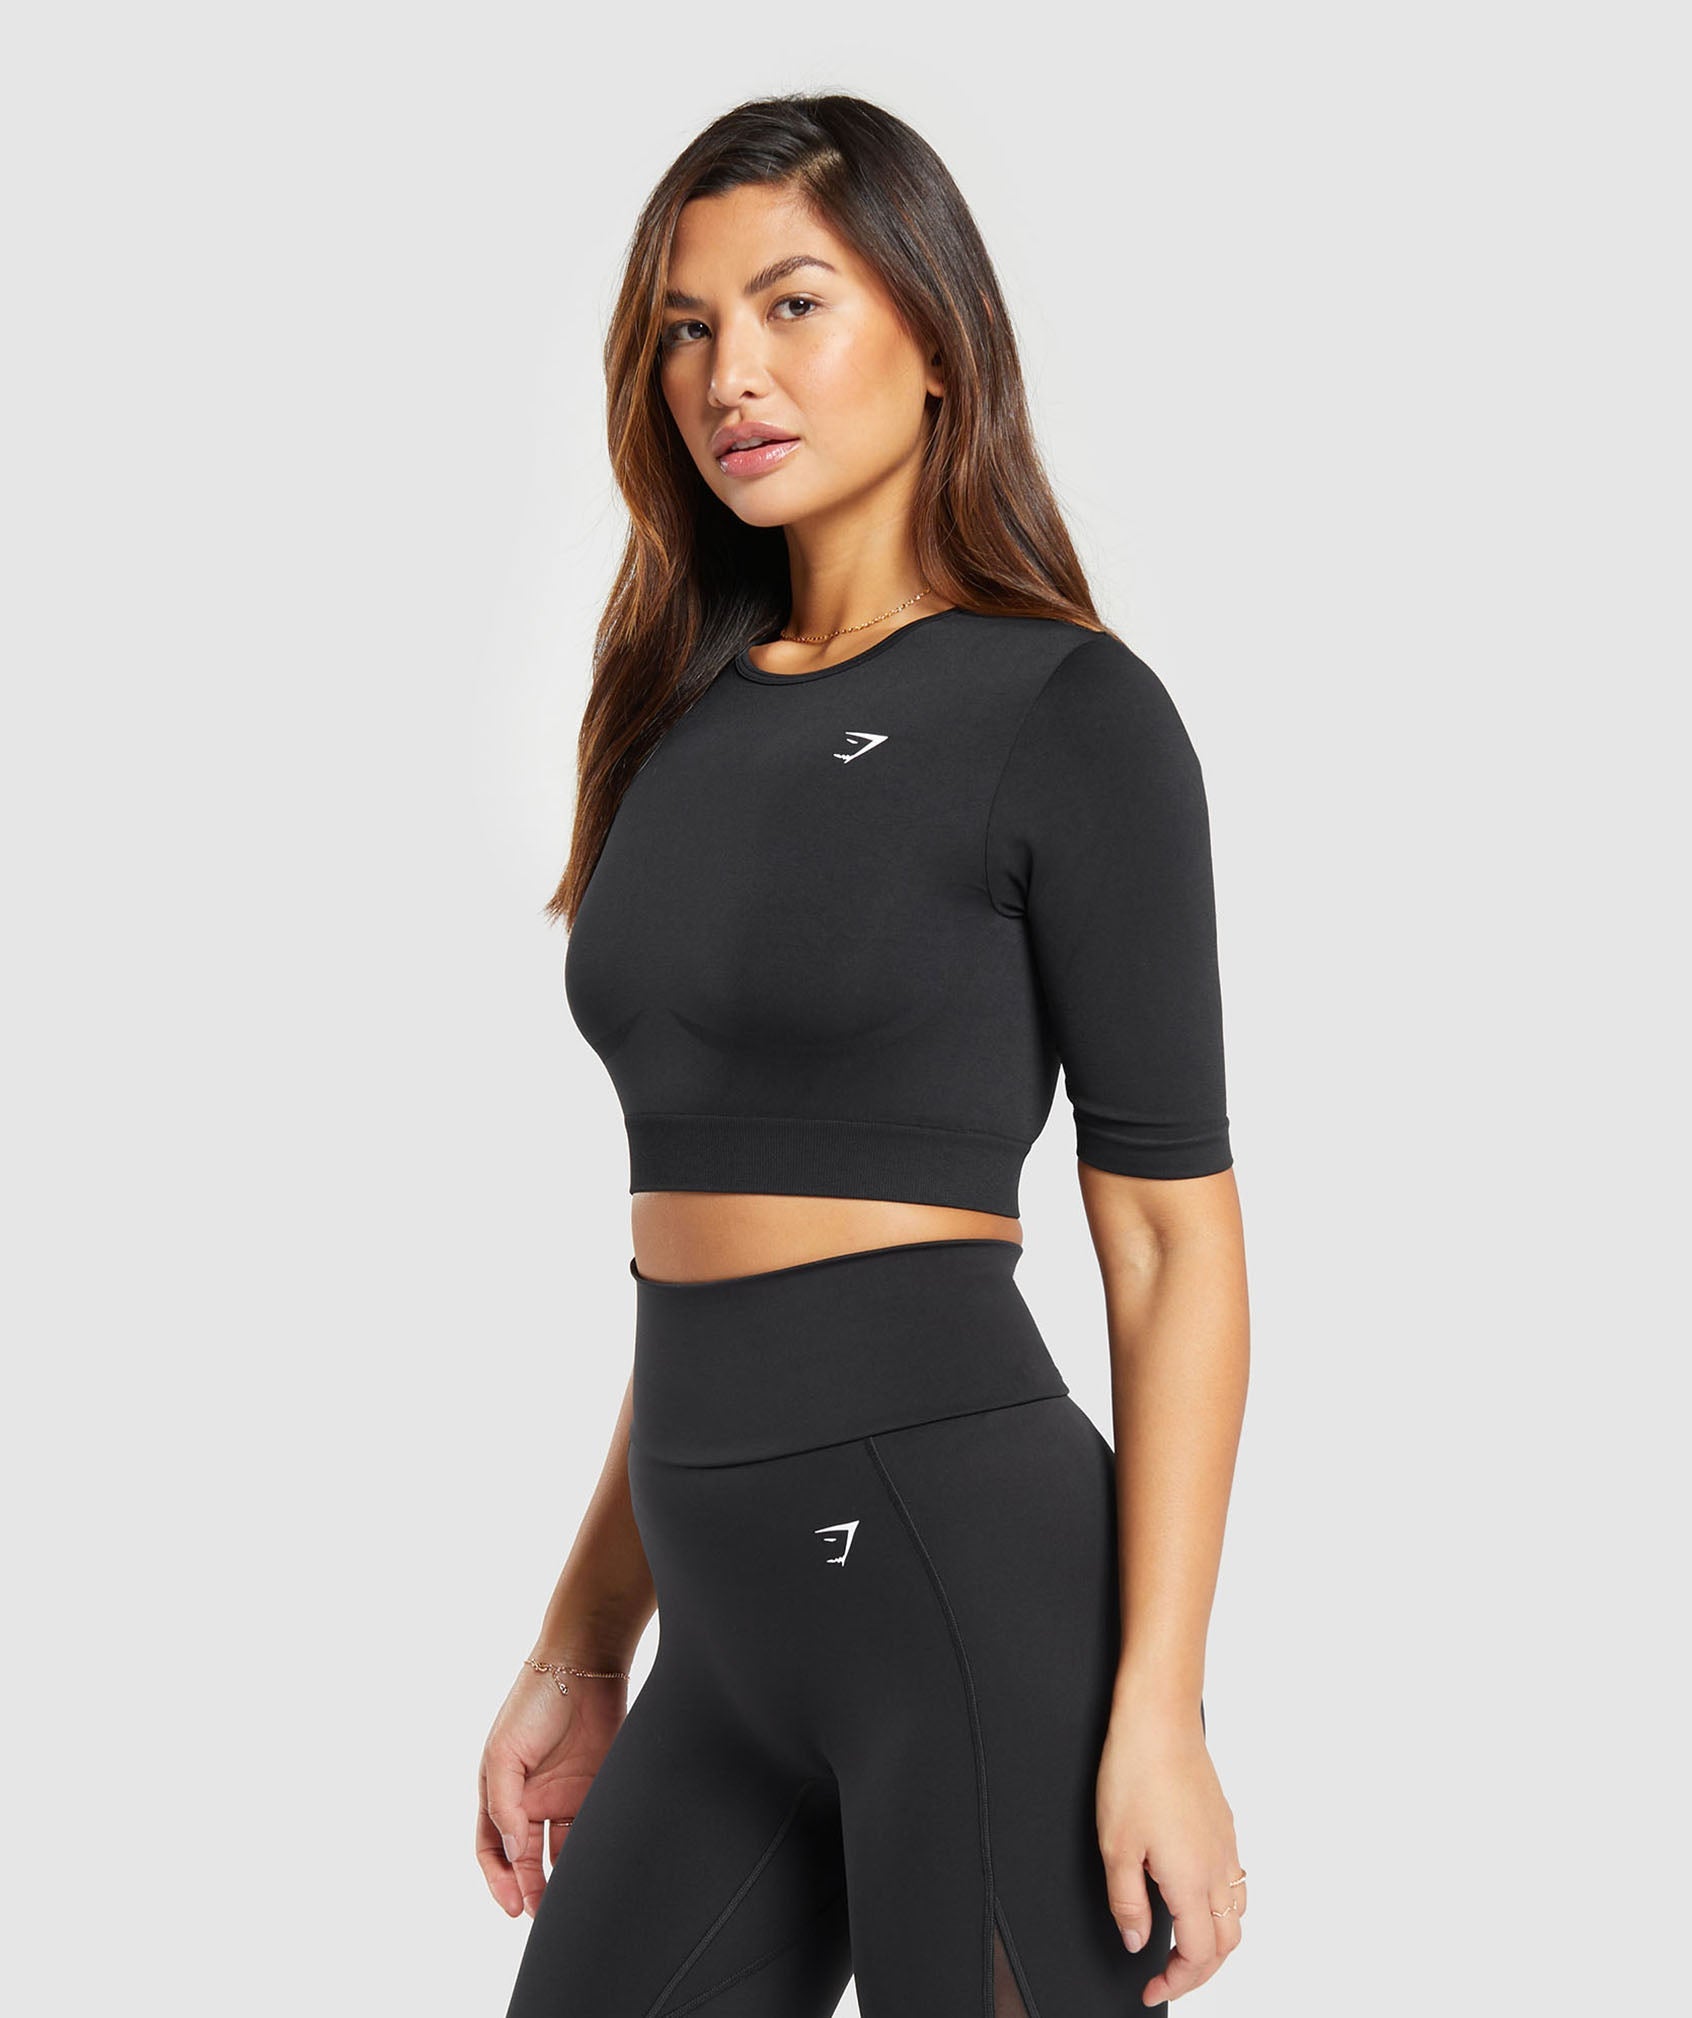 Everyday Seamless Crop Top in Black - view 5